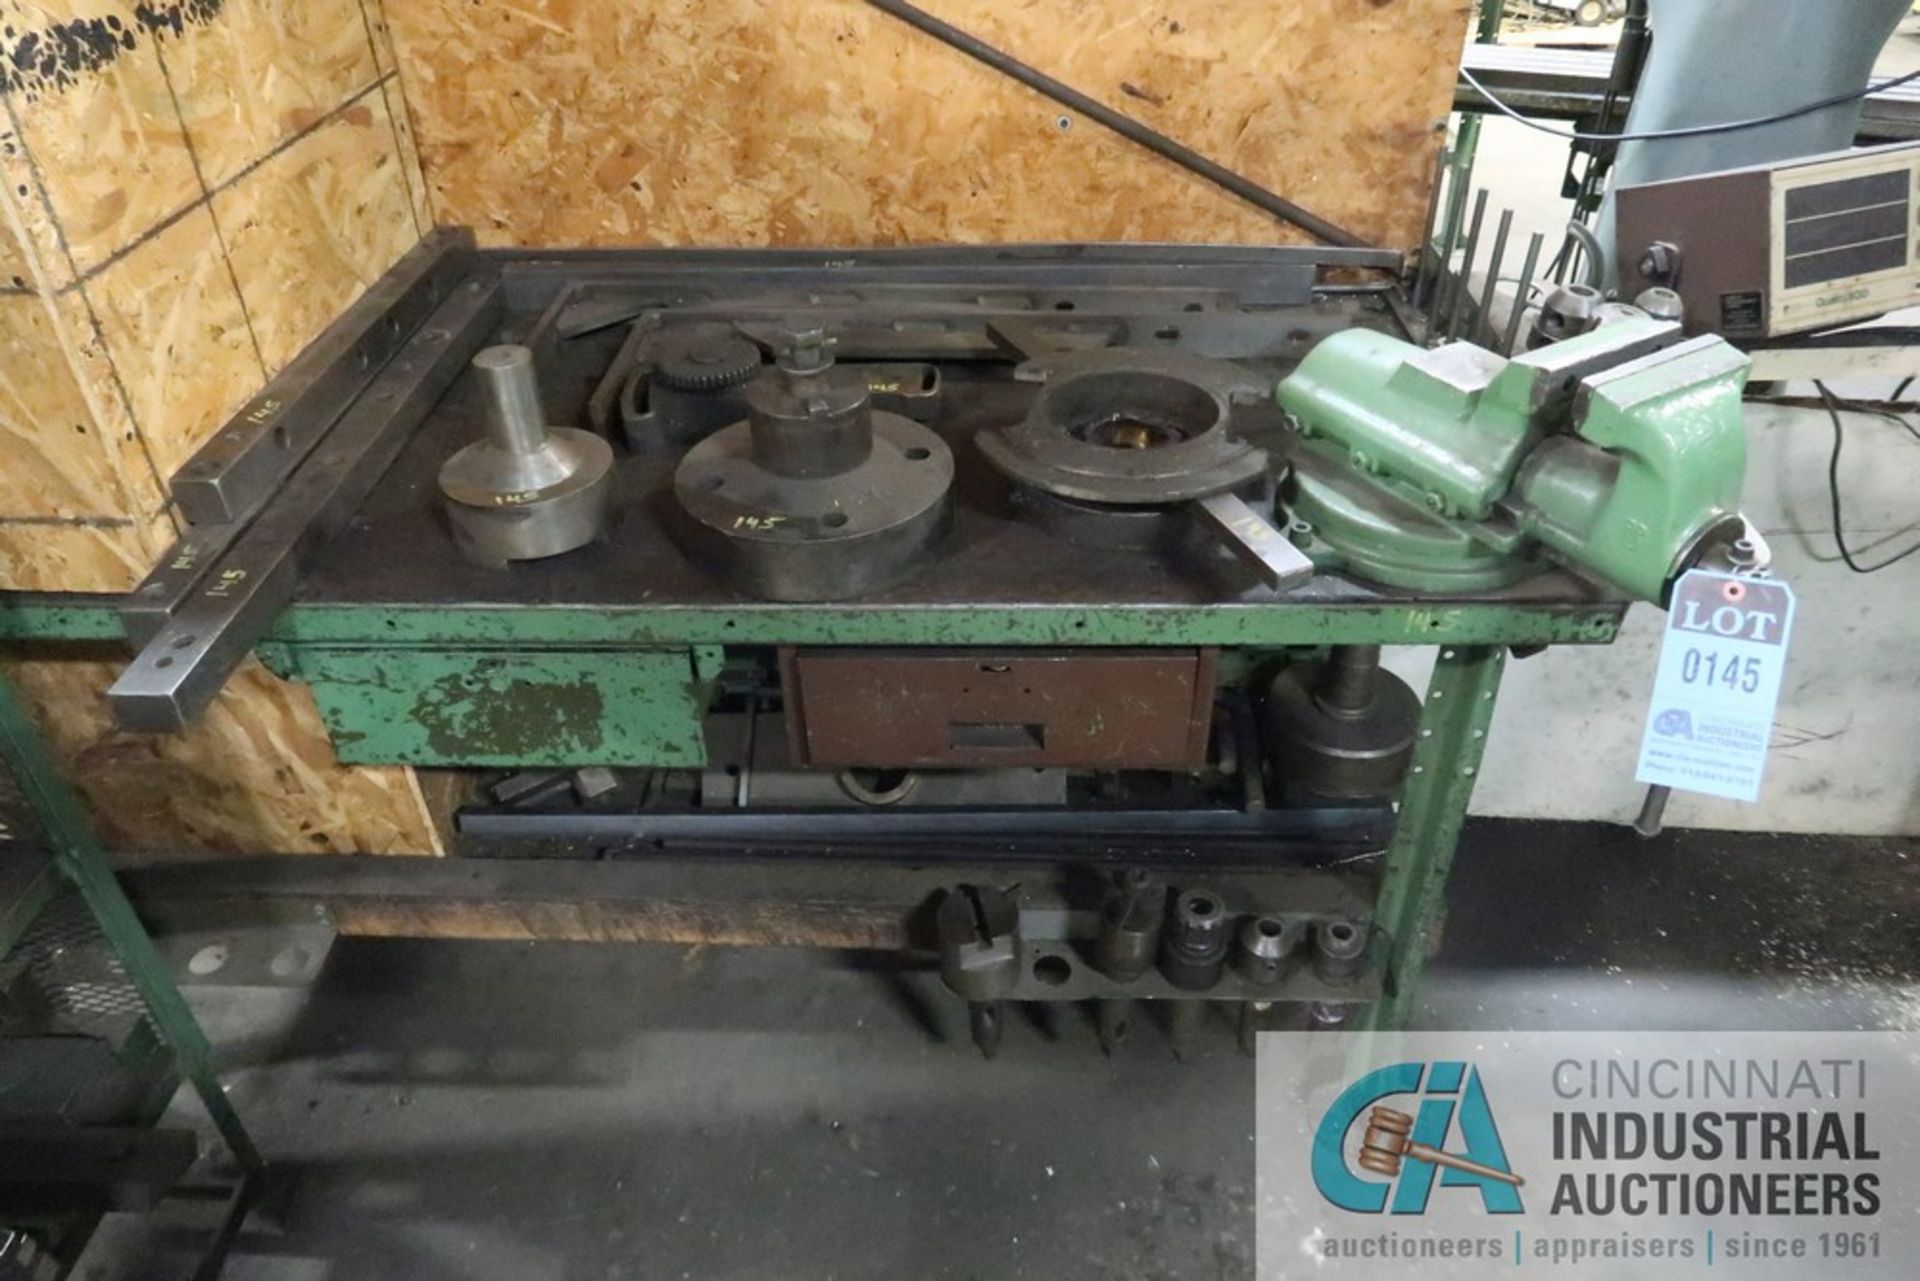 (LOT) BENCH AND RACK WITH BORING MILL TOOLING; TOOL HOLDERS, MILL CUTTERS